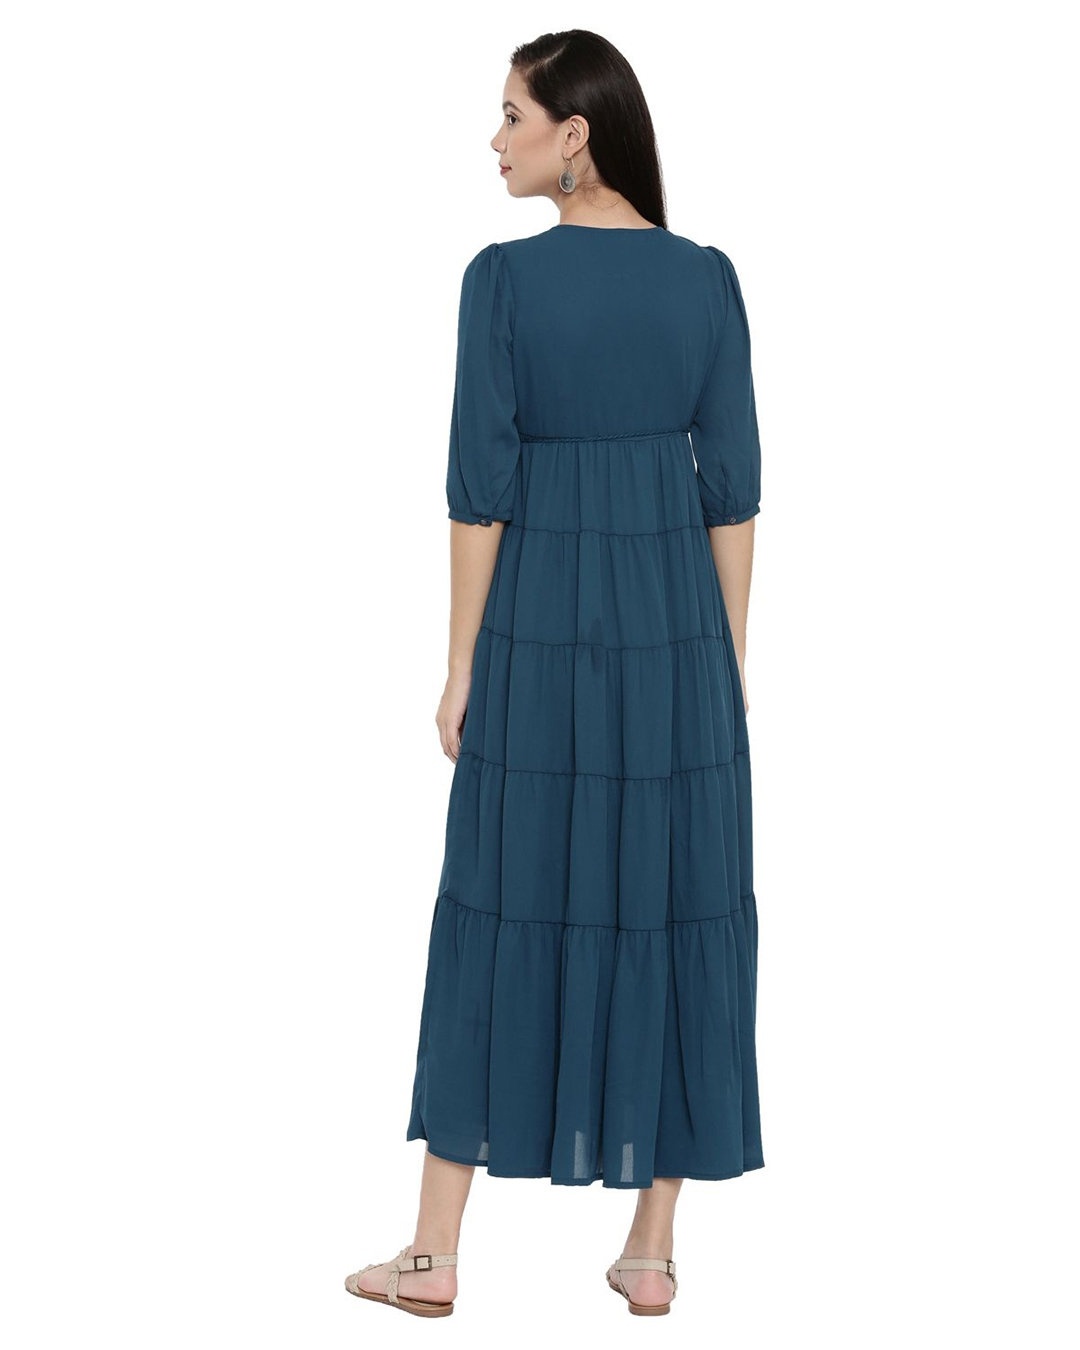 Shop Prussian Blue Tiered Maxi Dress For Women's